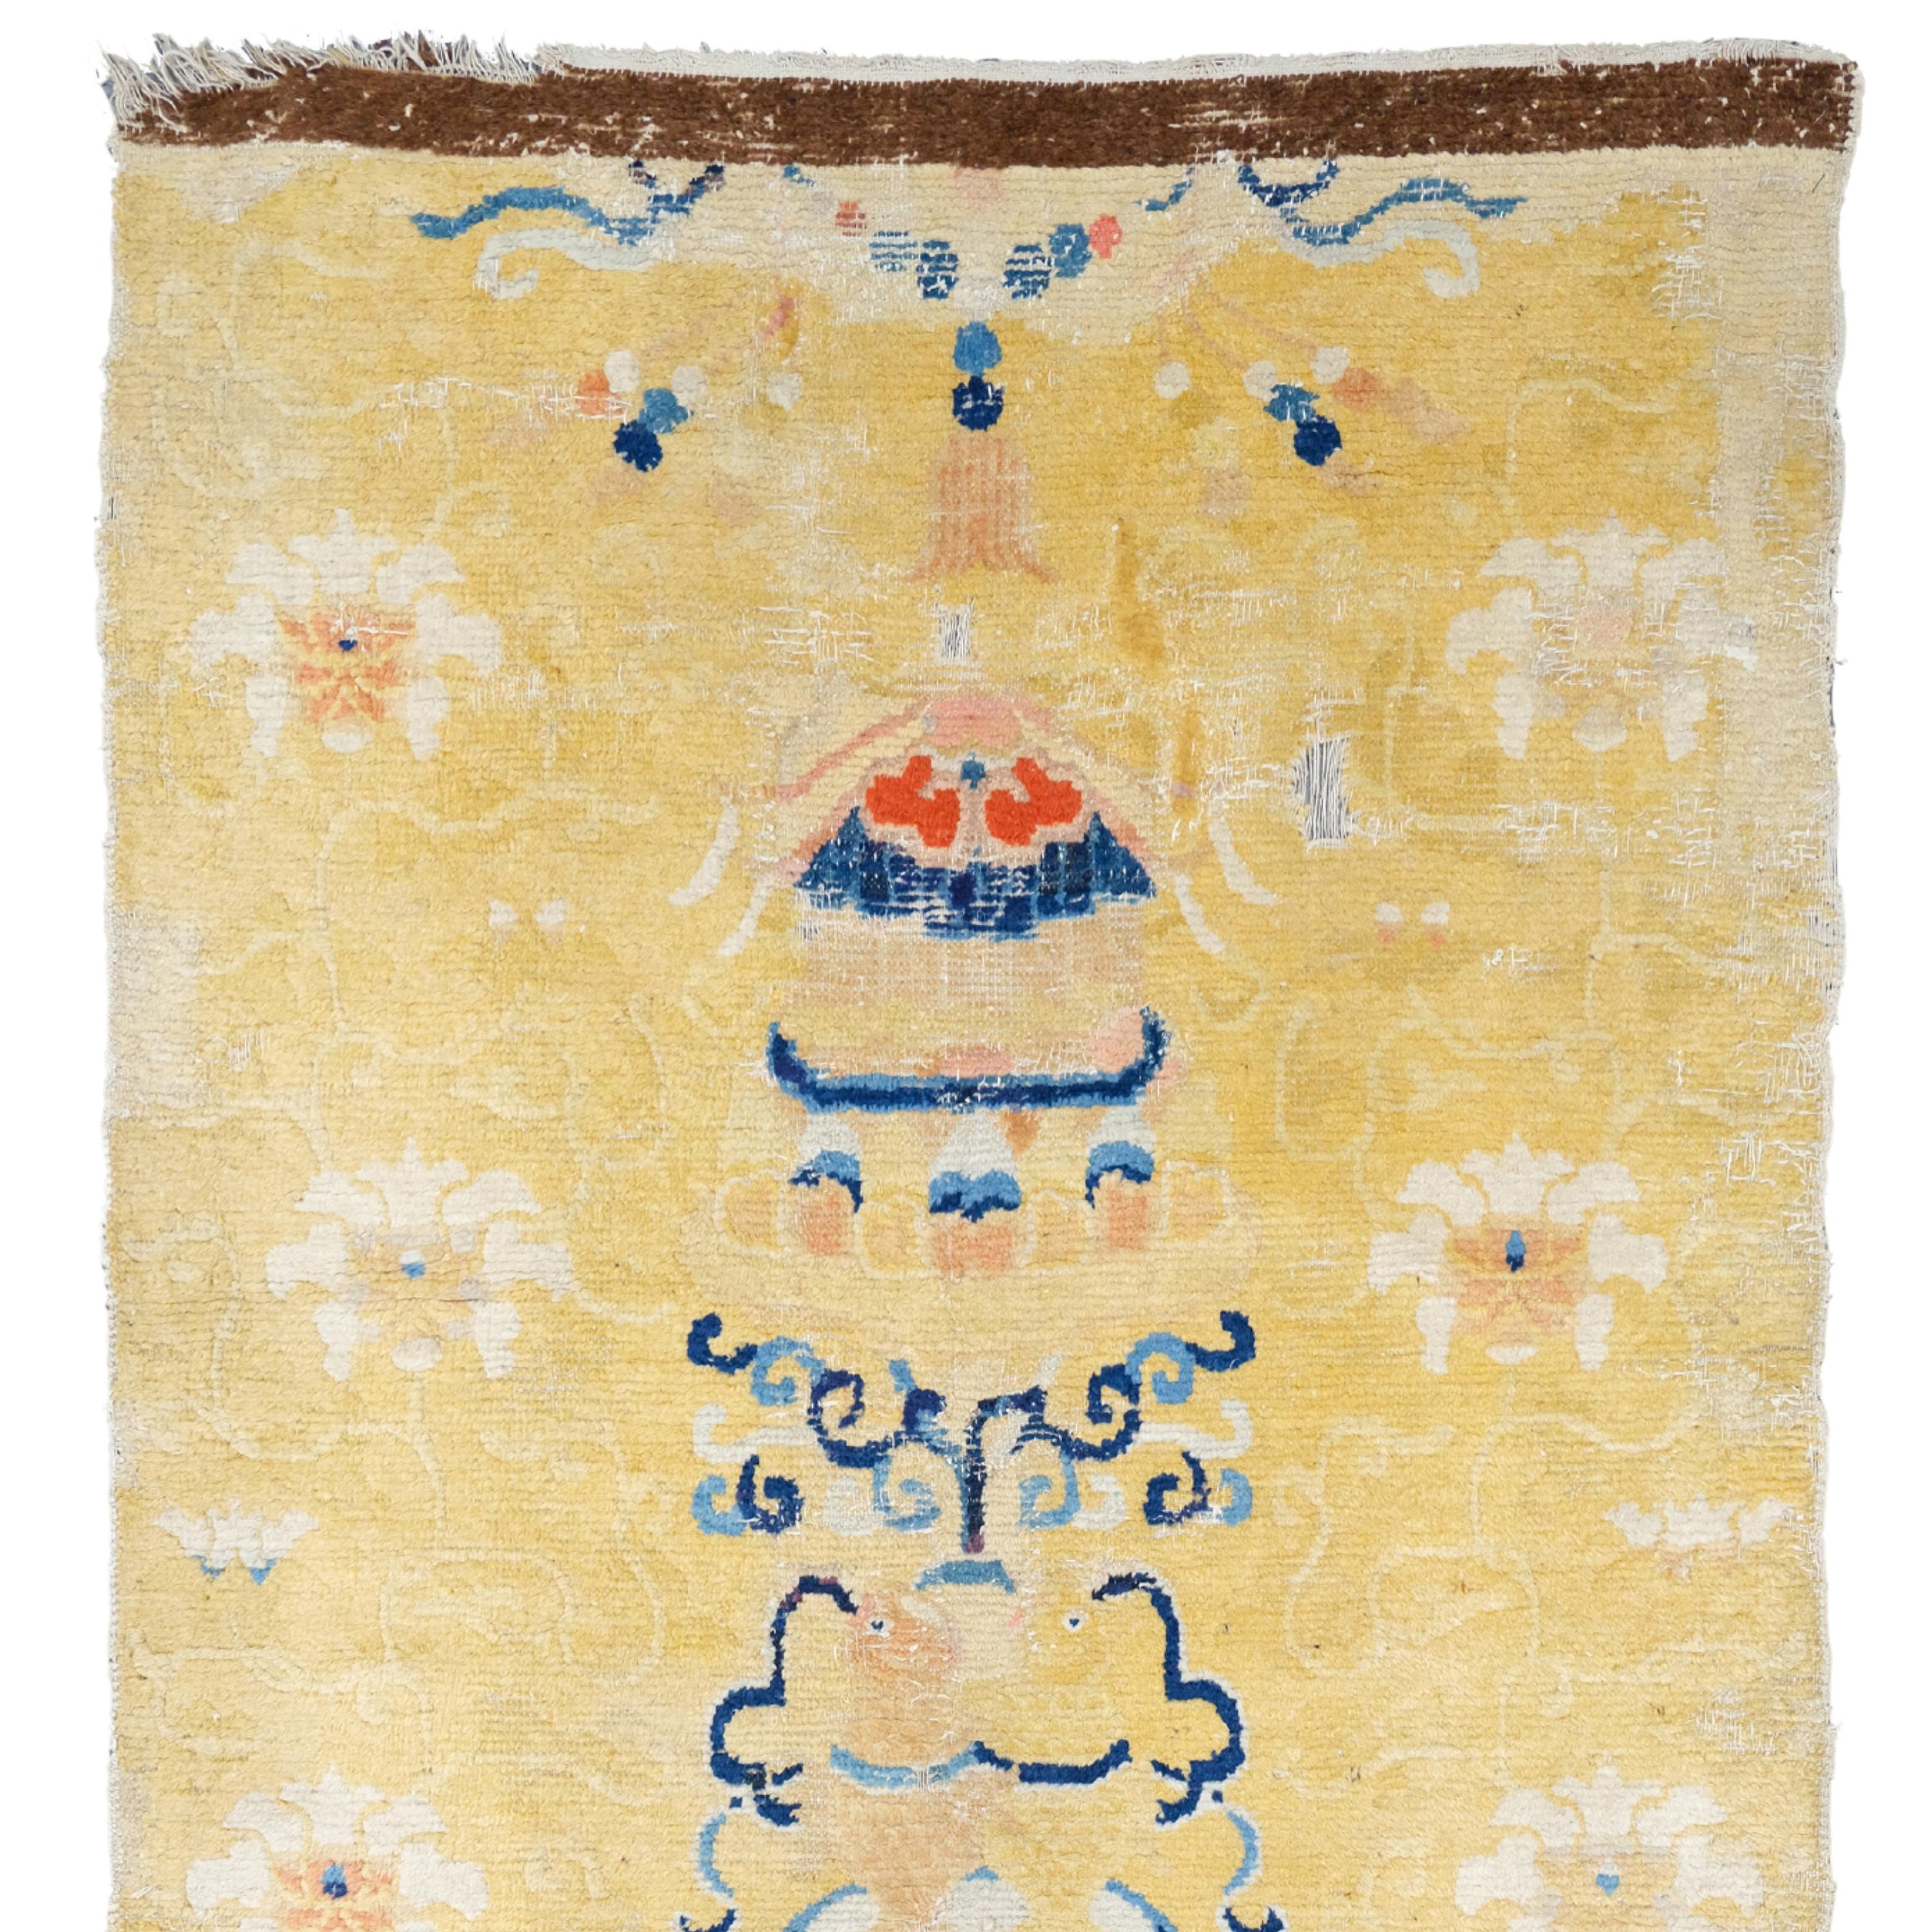 Late 18th Century Chinese Ningxia Pillar Rug
Size : 108×280 cm

This exquisite antique Chinese Ningxia pillar carpet dates from the late 18th century and is one of the most outstanding examples of its period. Details in blue and white tones